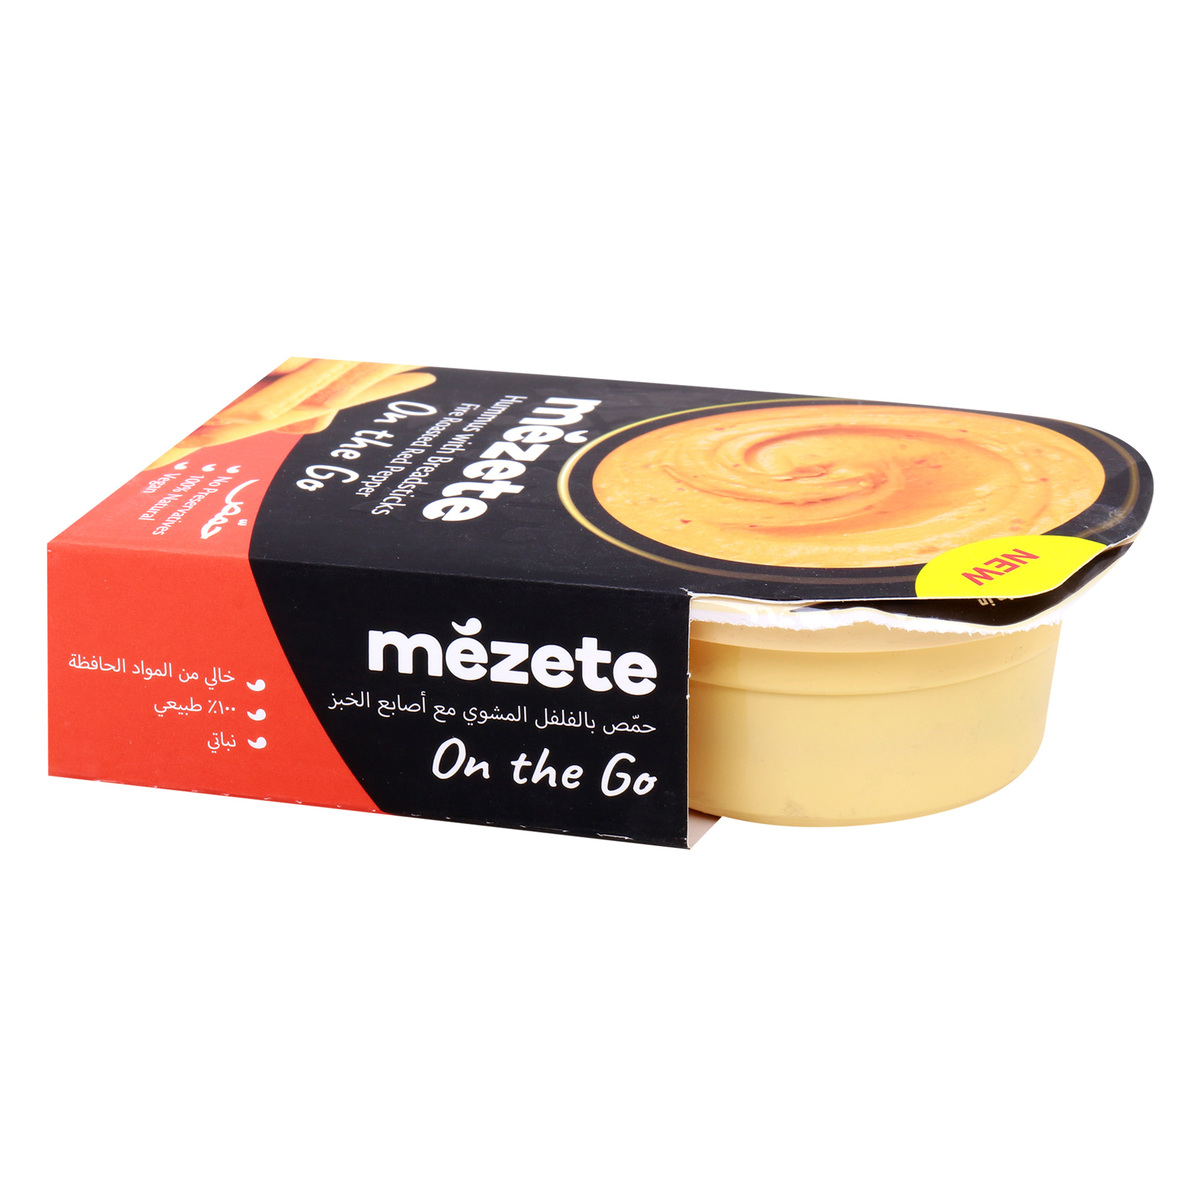 Mezete Hummus With Breadsticks, Fire Roasted Red Pepper, 92 g